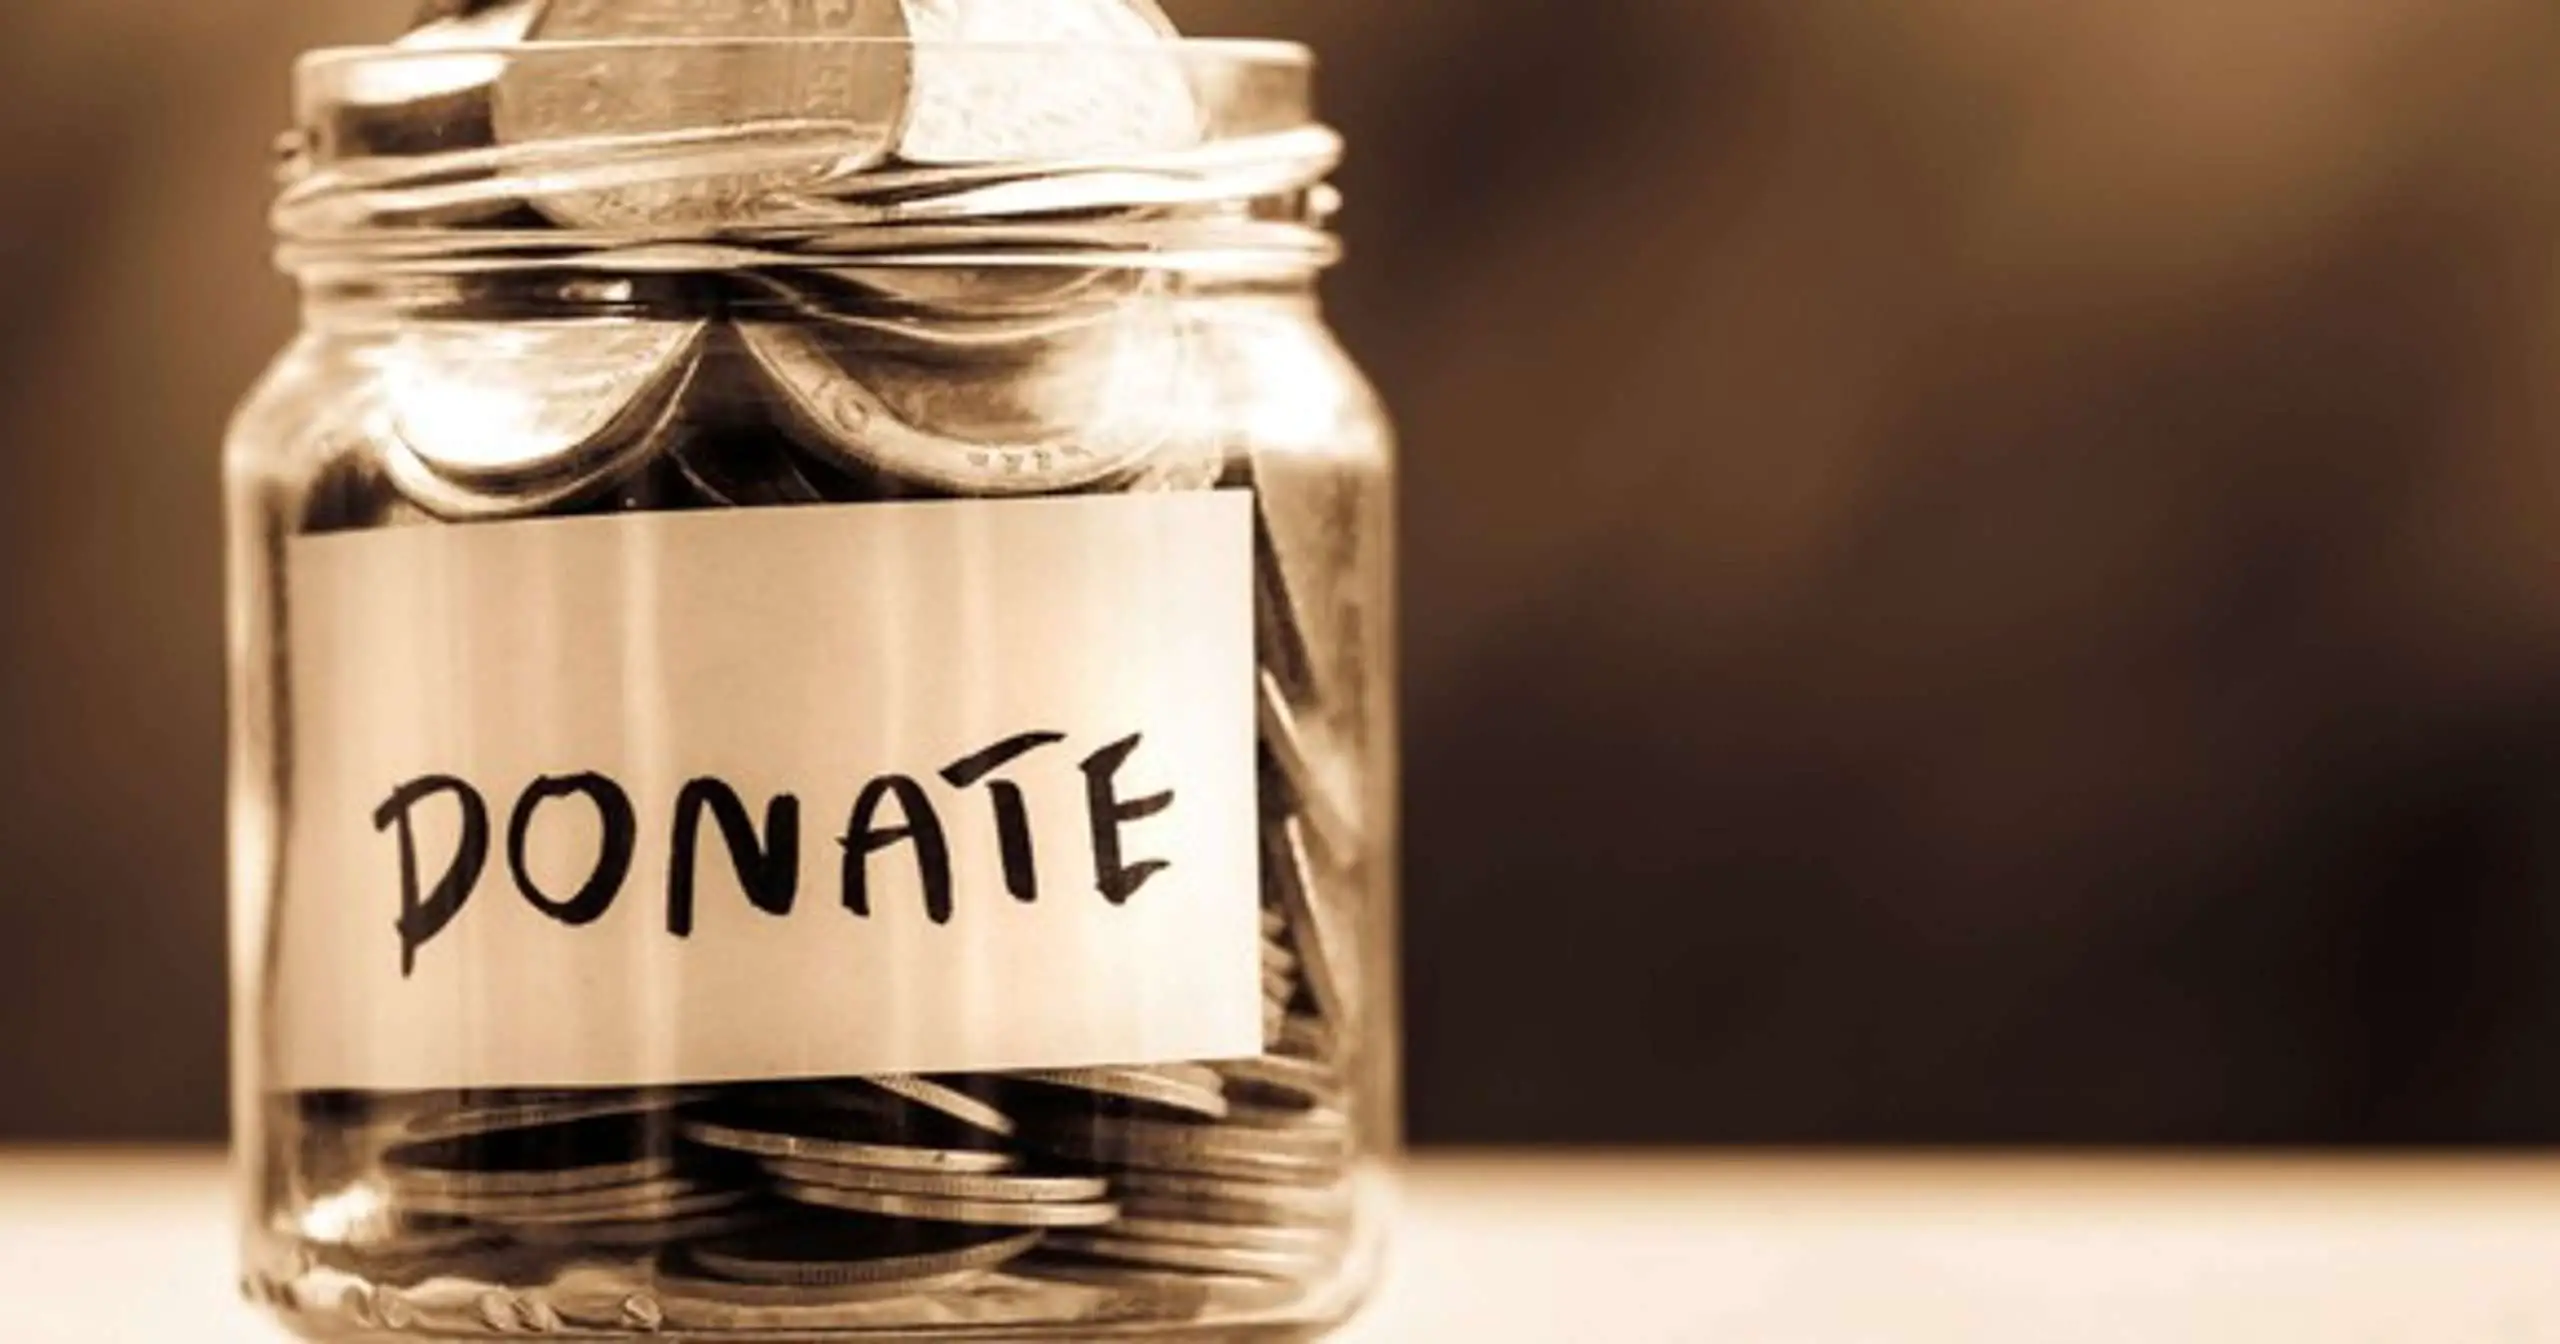 Bunching up charitable donations could help tax savings